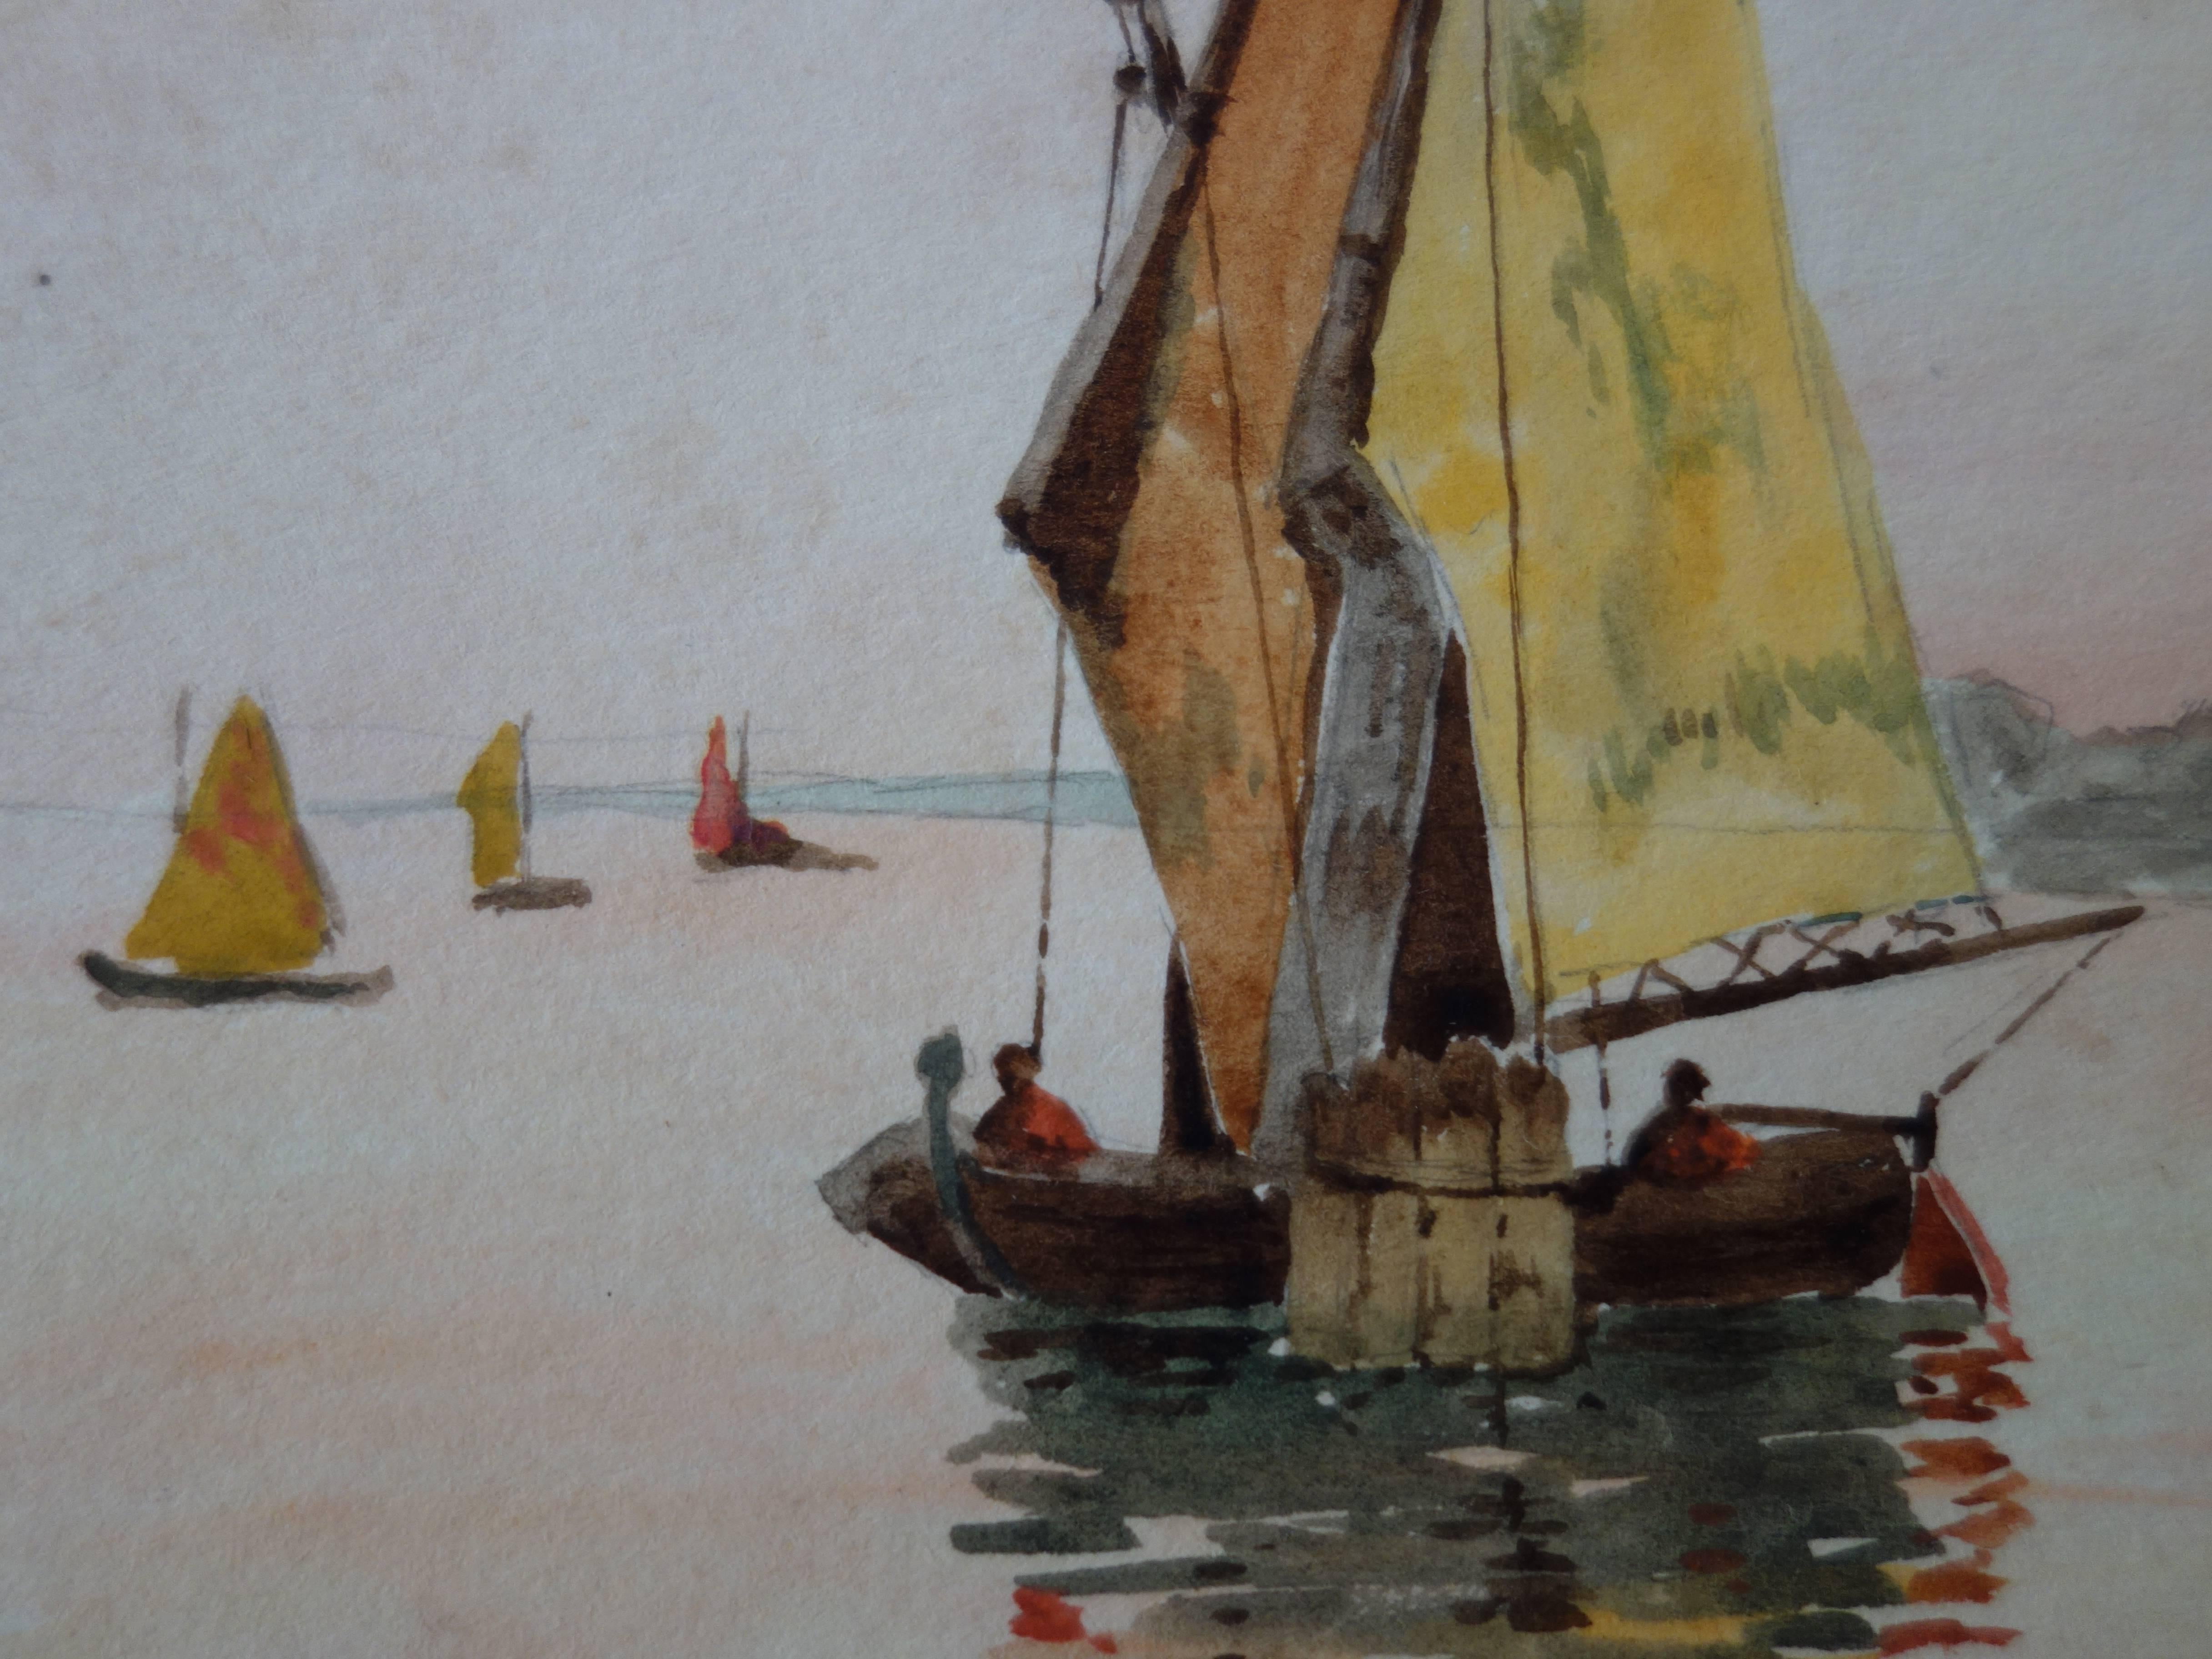 Edmond PELLISSON
Italy : Boats near Venice, c. 1902

Original watercolor painting
Handsigned bottom right
On vellum 18 x 26 cm (c. 7 x 10.5in)
There is another watercolor on the back of the sheet (Medevial scenes)

Excellent condition

